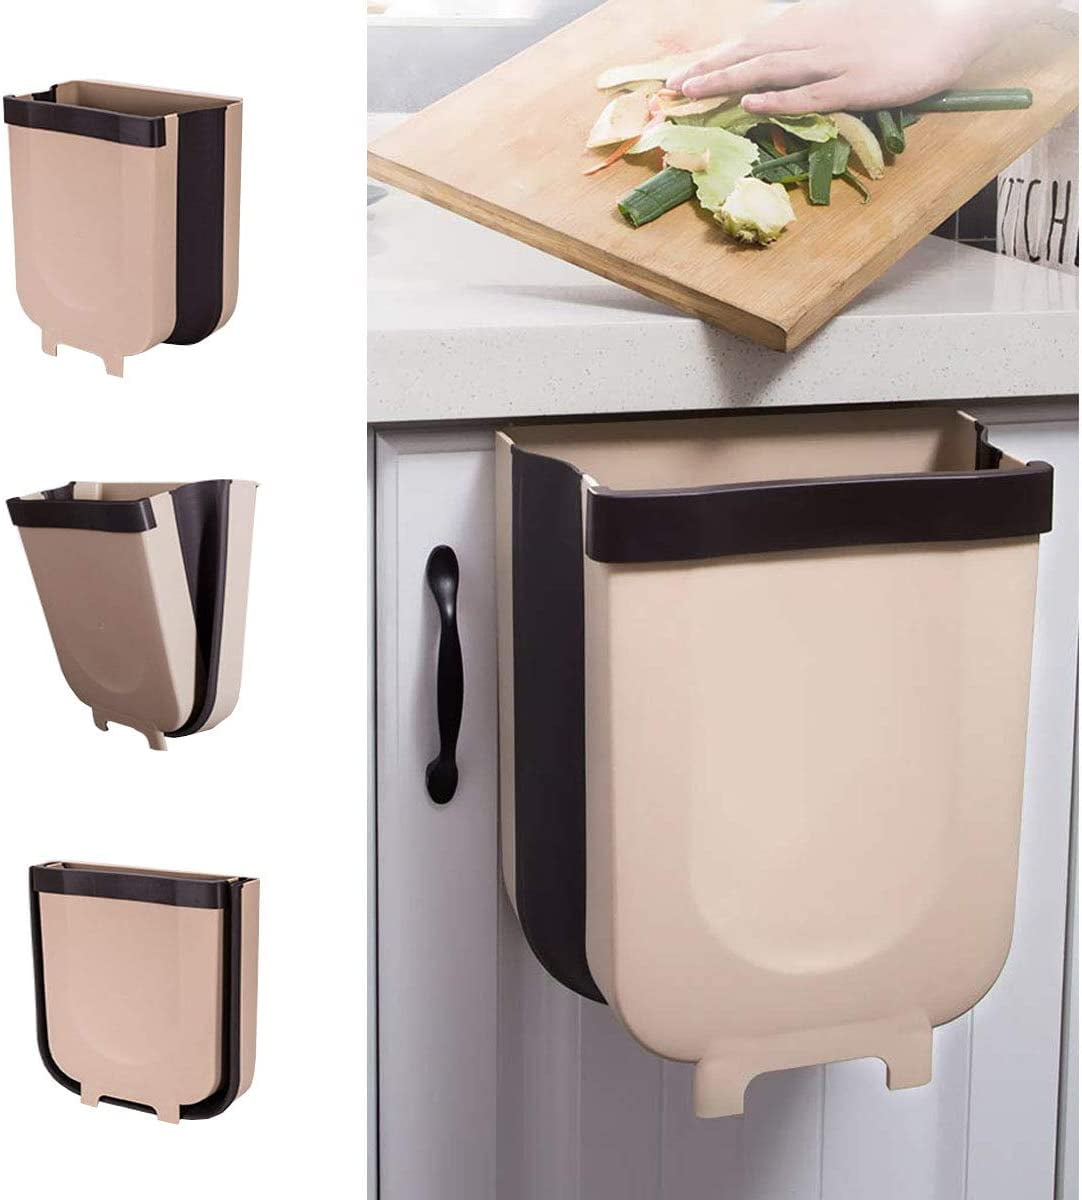 melupa Hanging Trash Can for Kitchen Cabinet Door Trash Bin Small Compact Garbage Can Attached to Cabinet Door Kitchen Drawer Bedroom Dorm Room Car Waste Bin